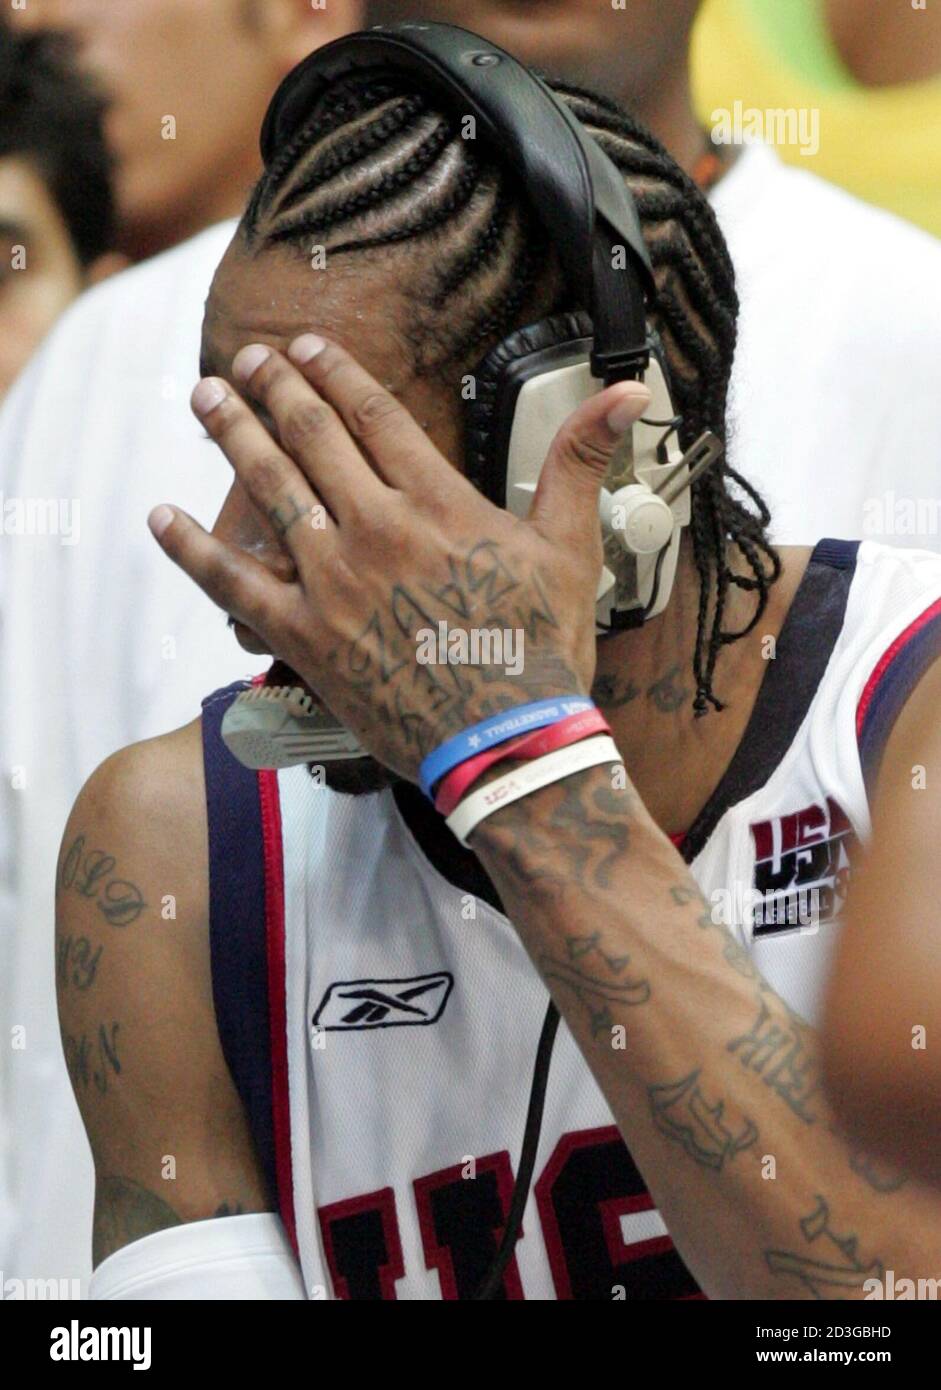 USA Olympic team guard Allen Iverson of Philadelphia 76'ers covers his face  during a TV interview in Istanbul. USA Olympic team guard Allen Iverson of  Philadelphia 76'ers whose shoulders and arms covered